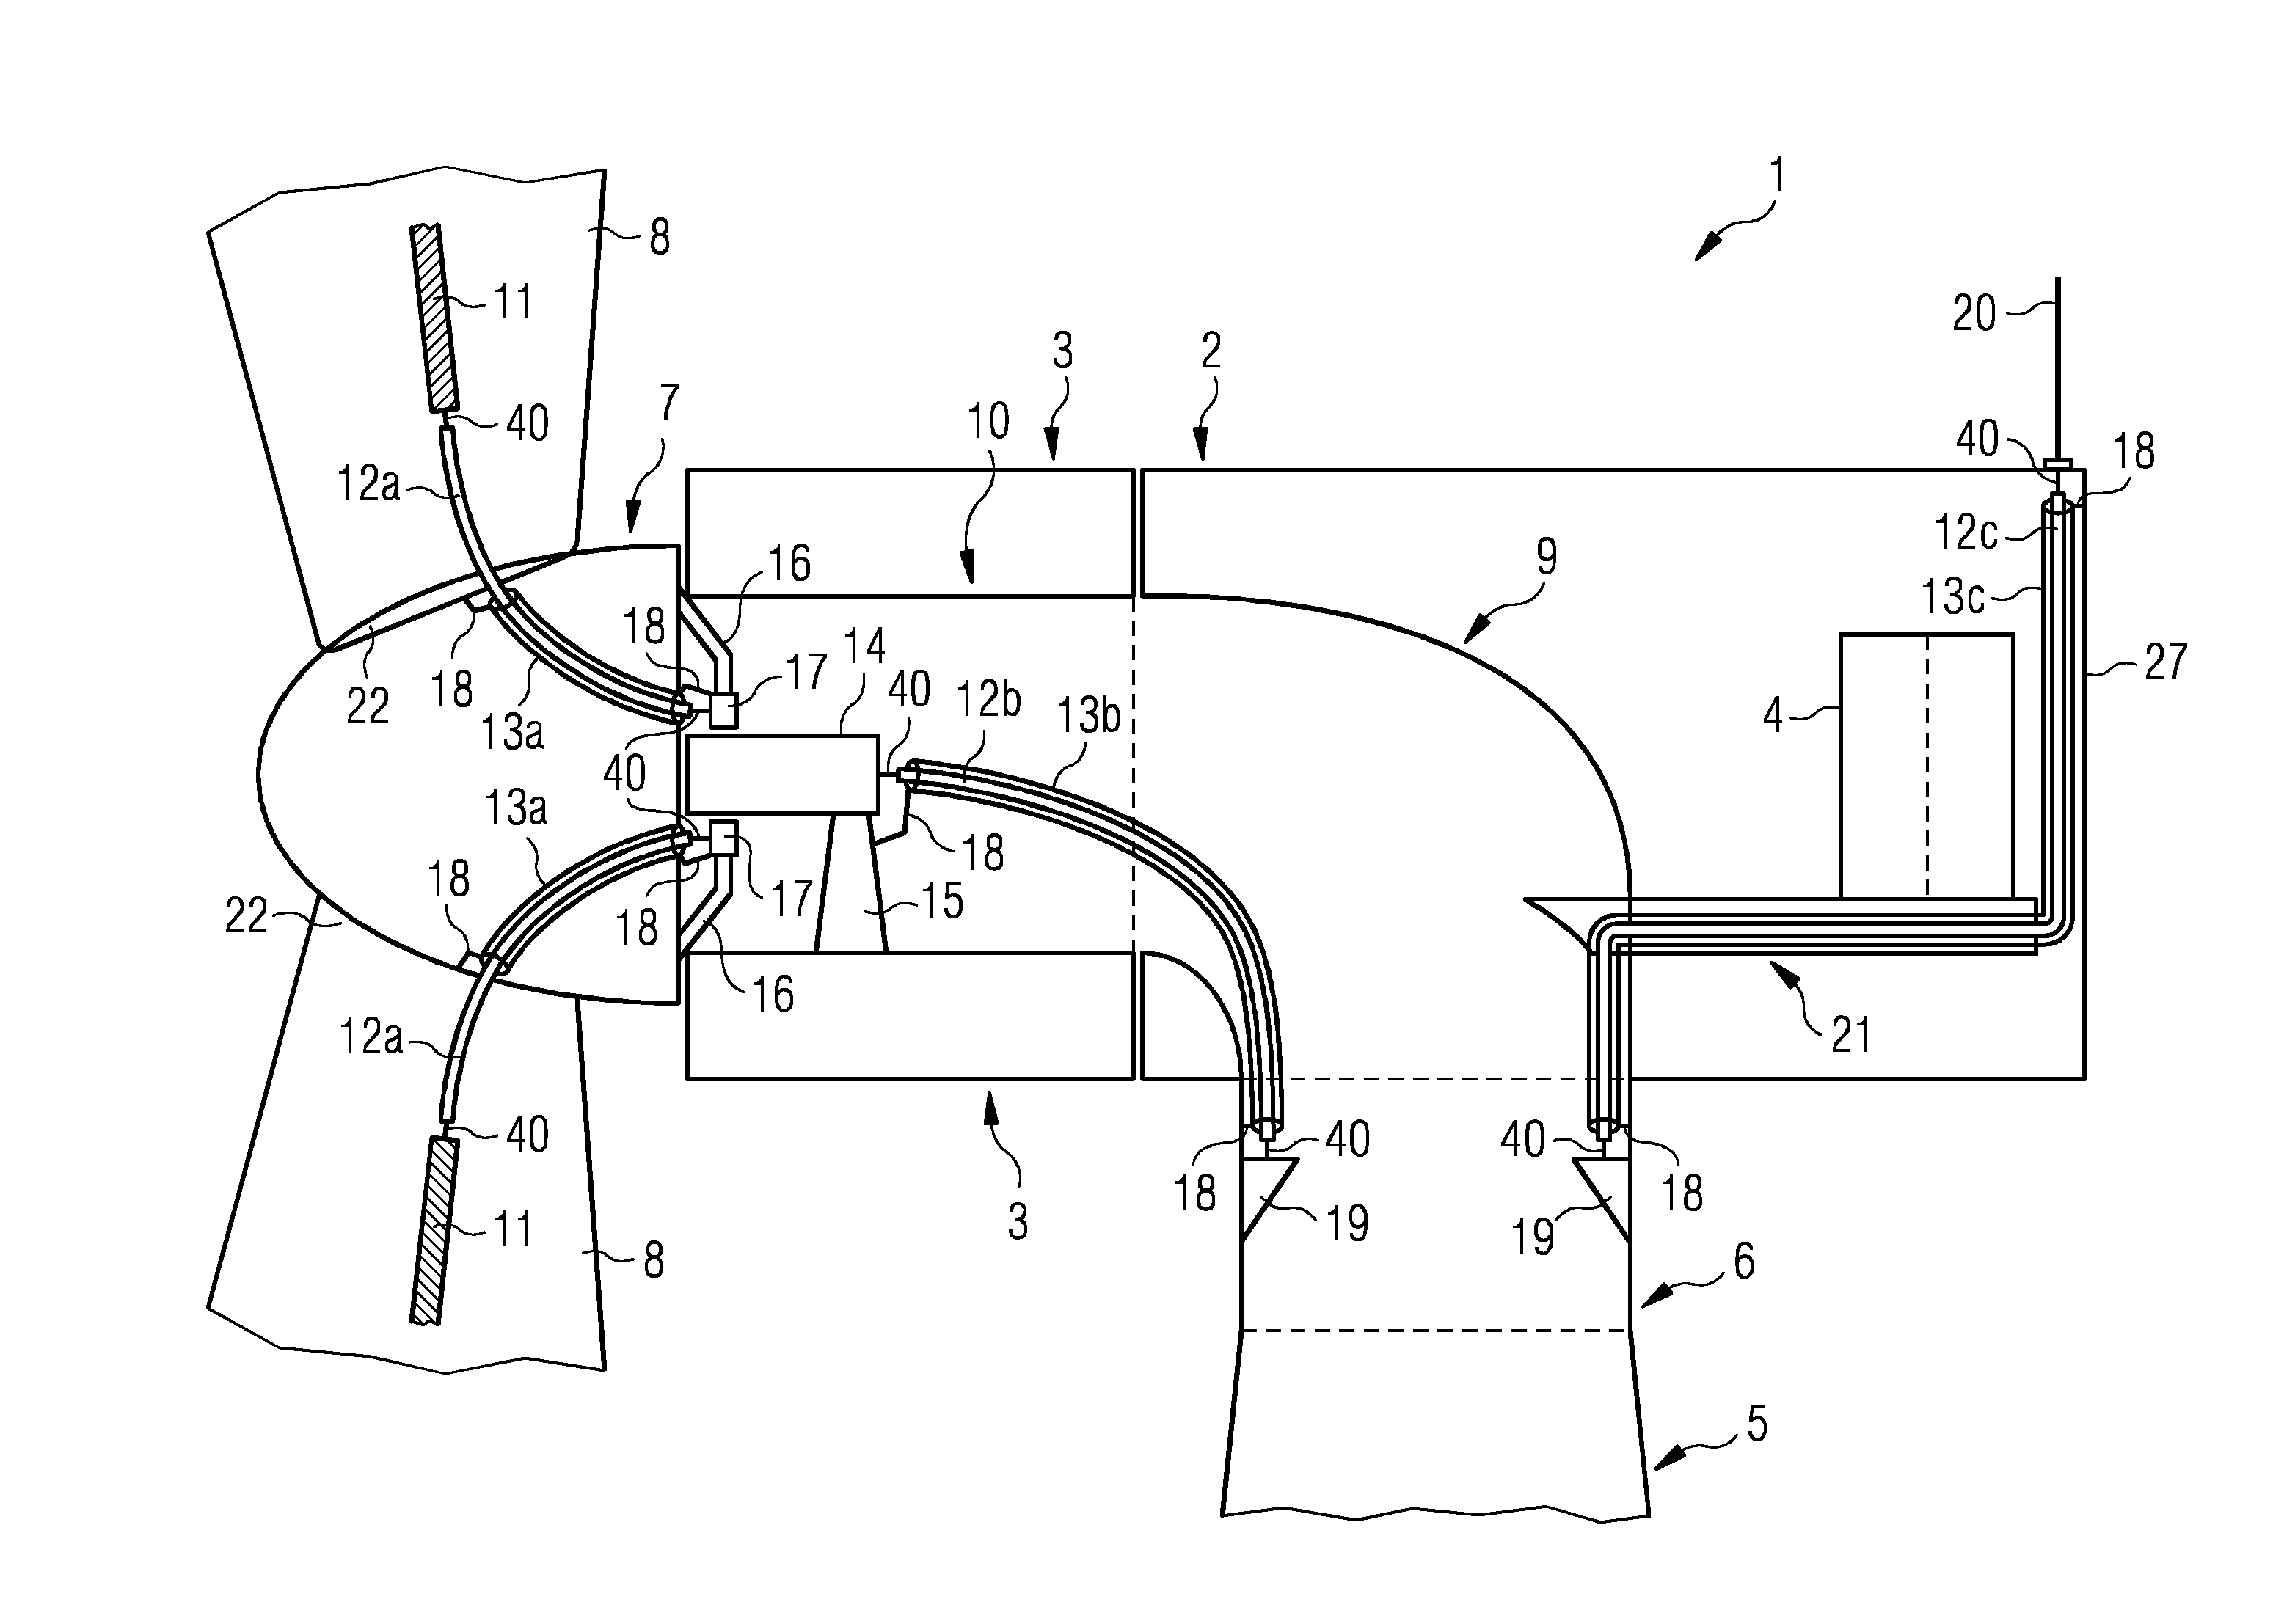 Lightning protection system for a wind turbine, wind turbine and method for protecting components of a wind turbine against lightning strikes